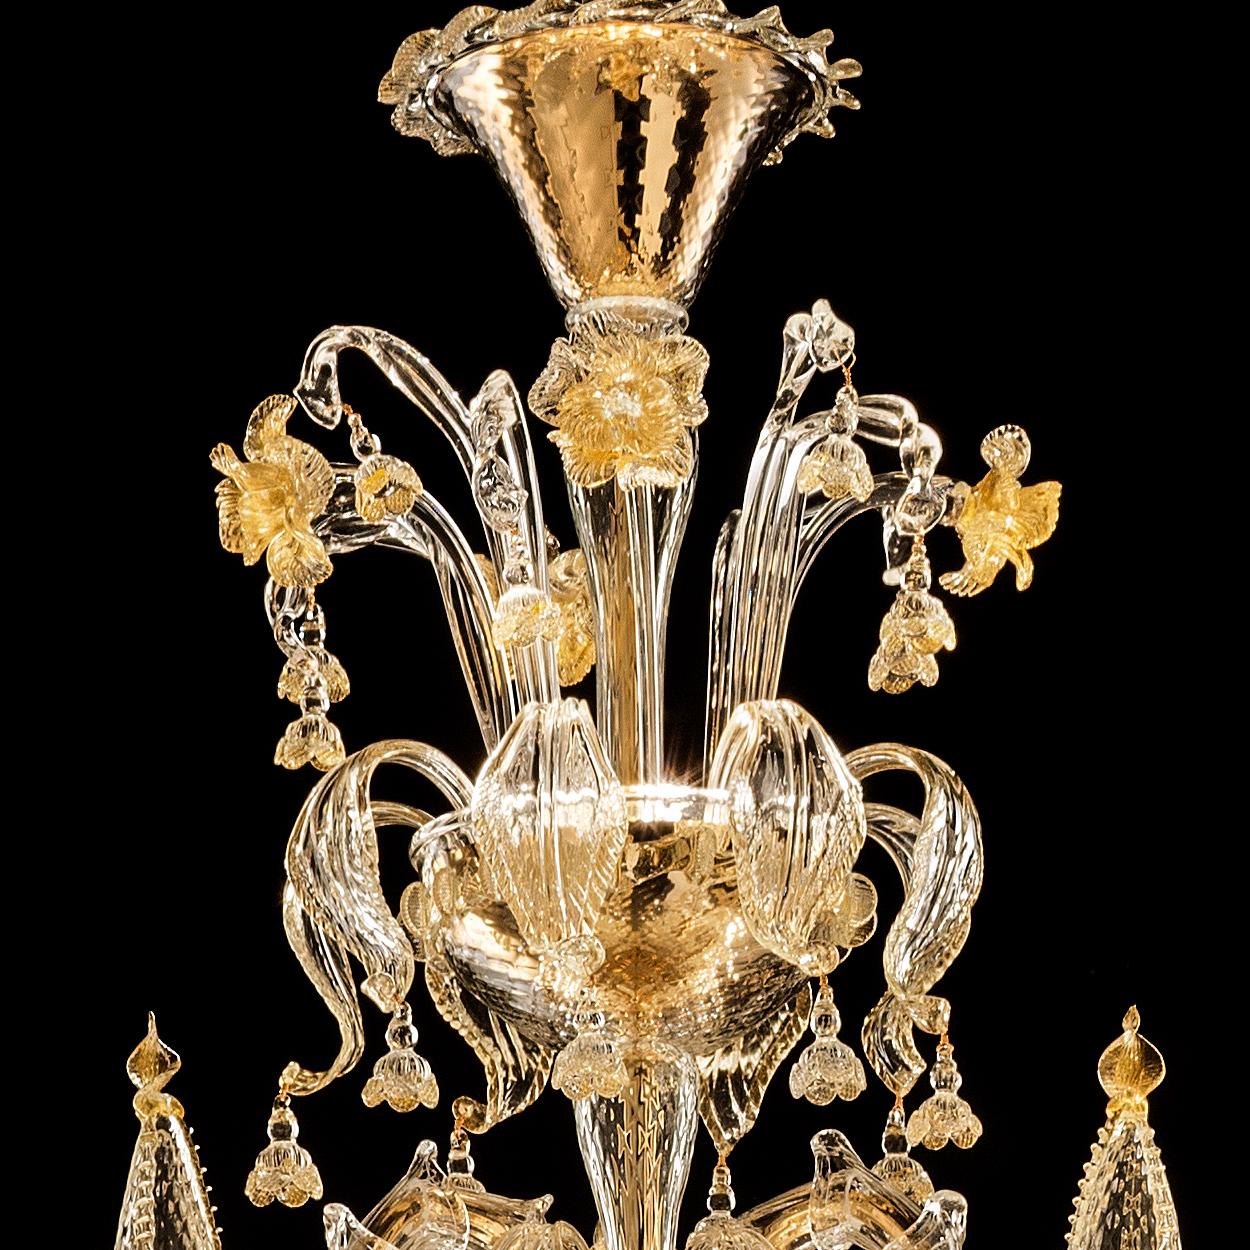 Polished 1 of the 2 Exceptional and Rich Chandeliers by Signoretto, Murano For Sale